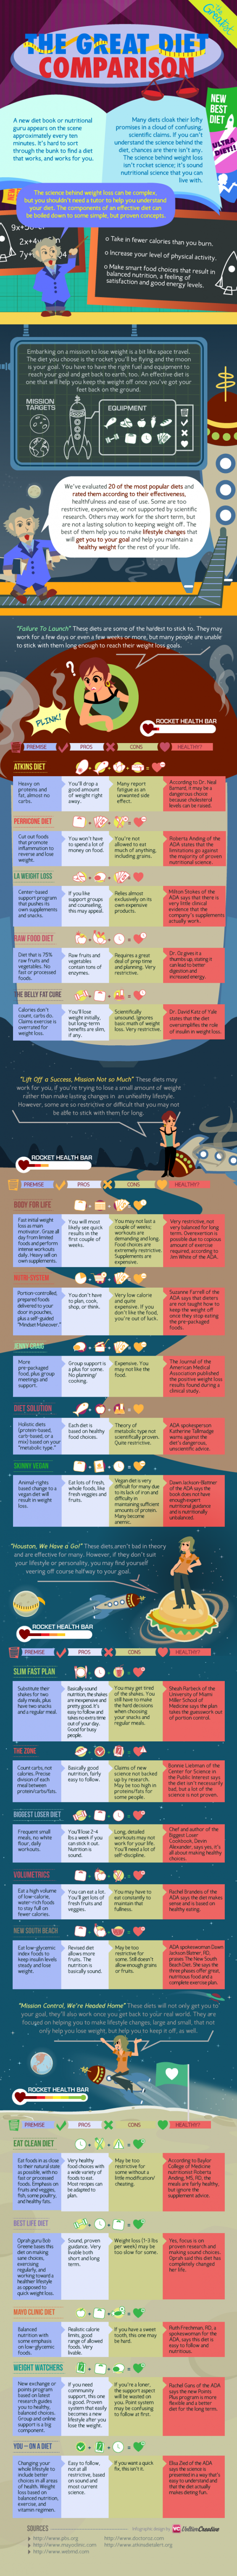 The Battle of the Diets: Comparing 20 Great Diets - Infographic